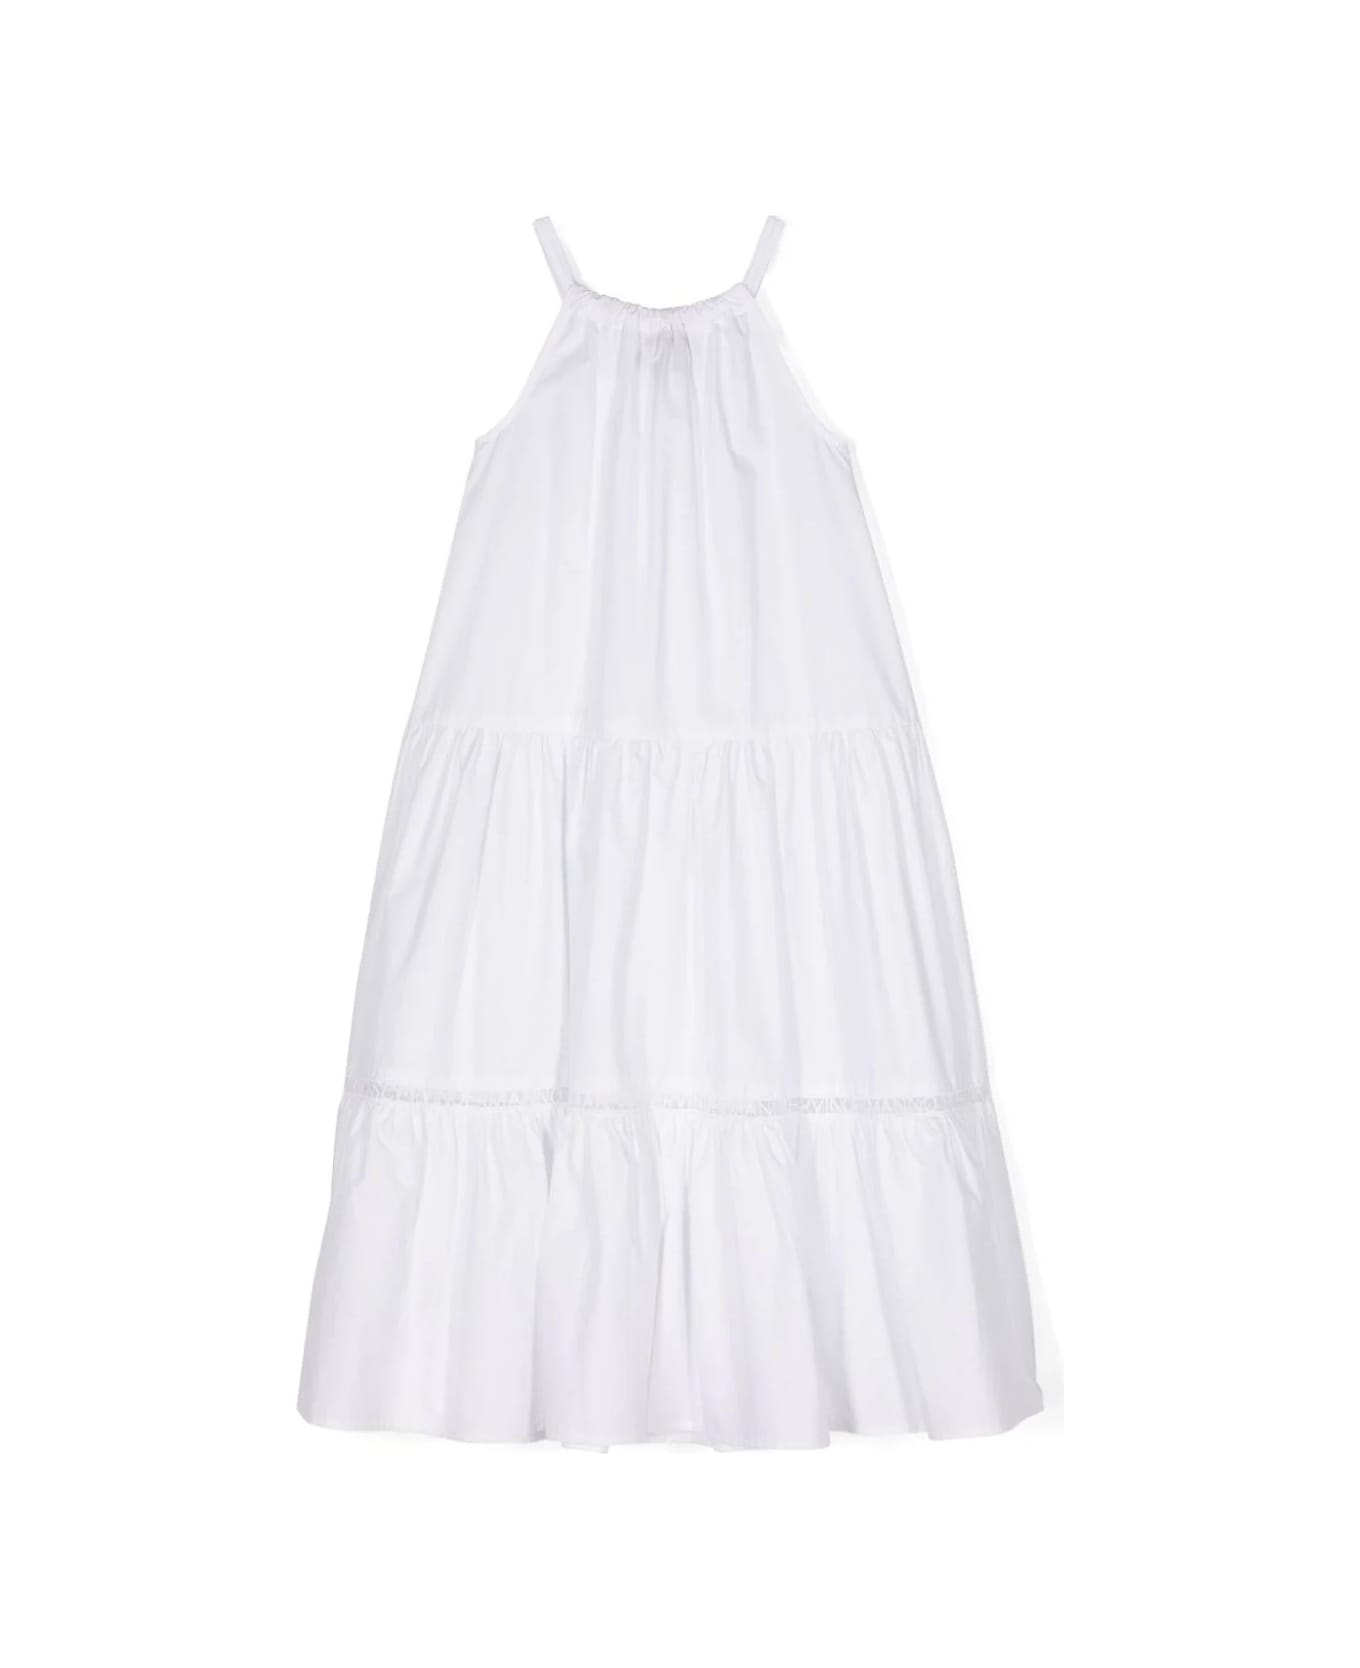 Ermanno Scervino Junior Sleeveless White Flounced Dress With Lace - White